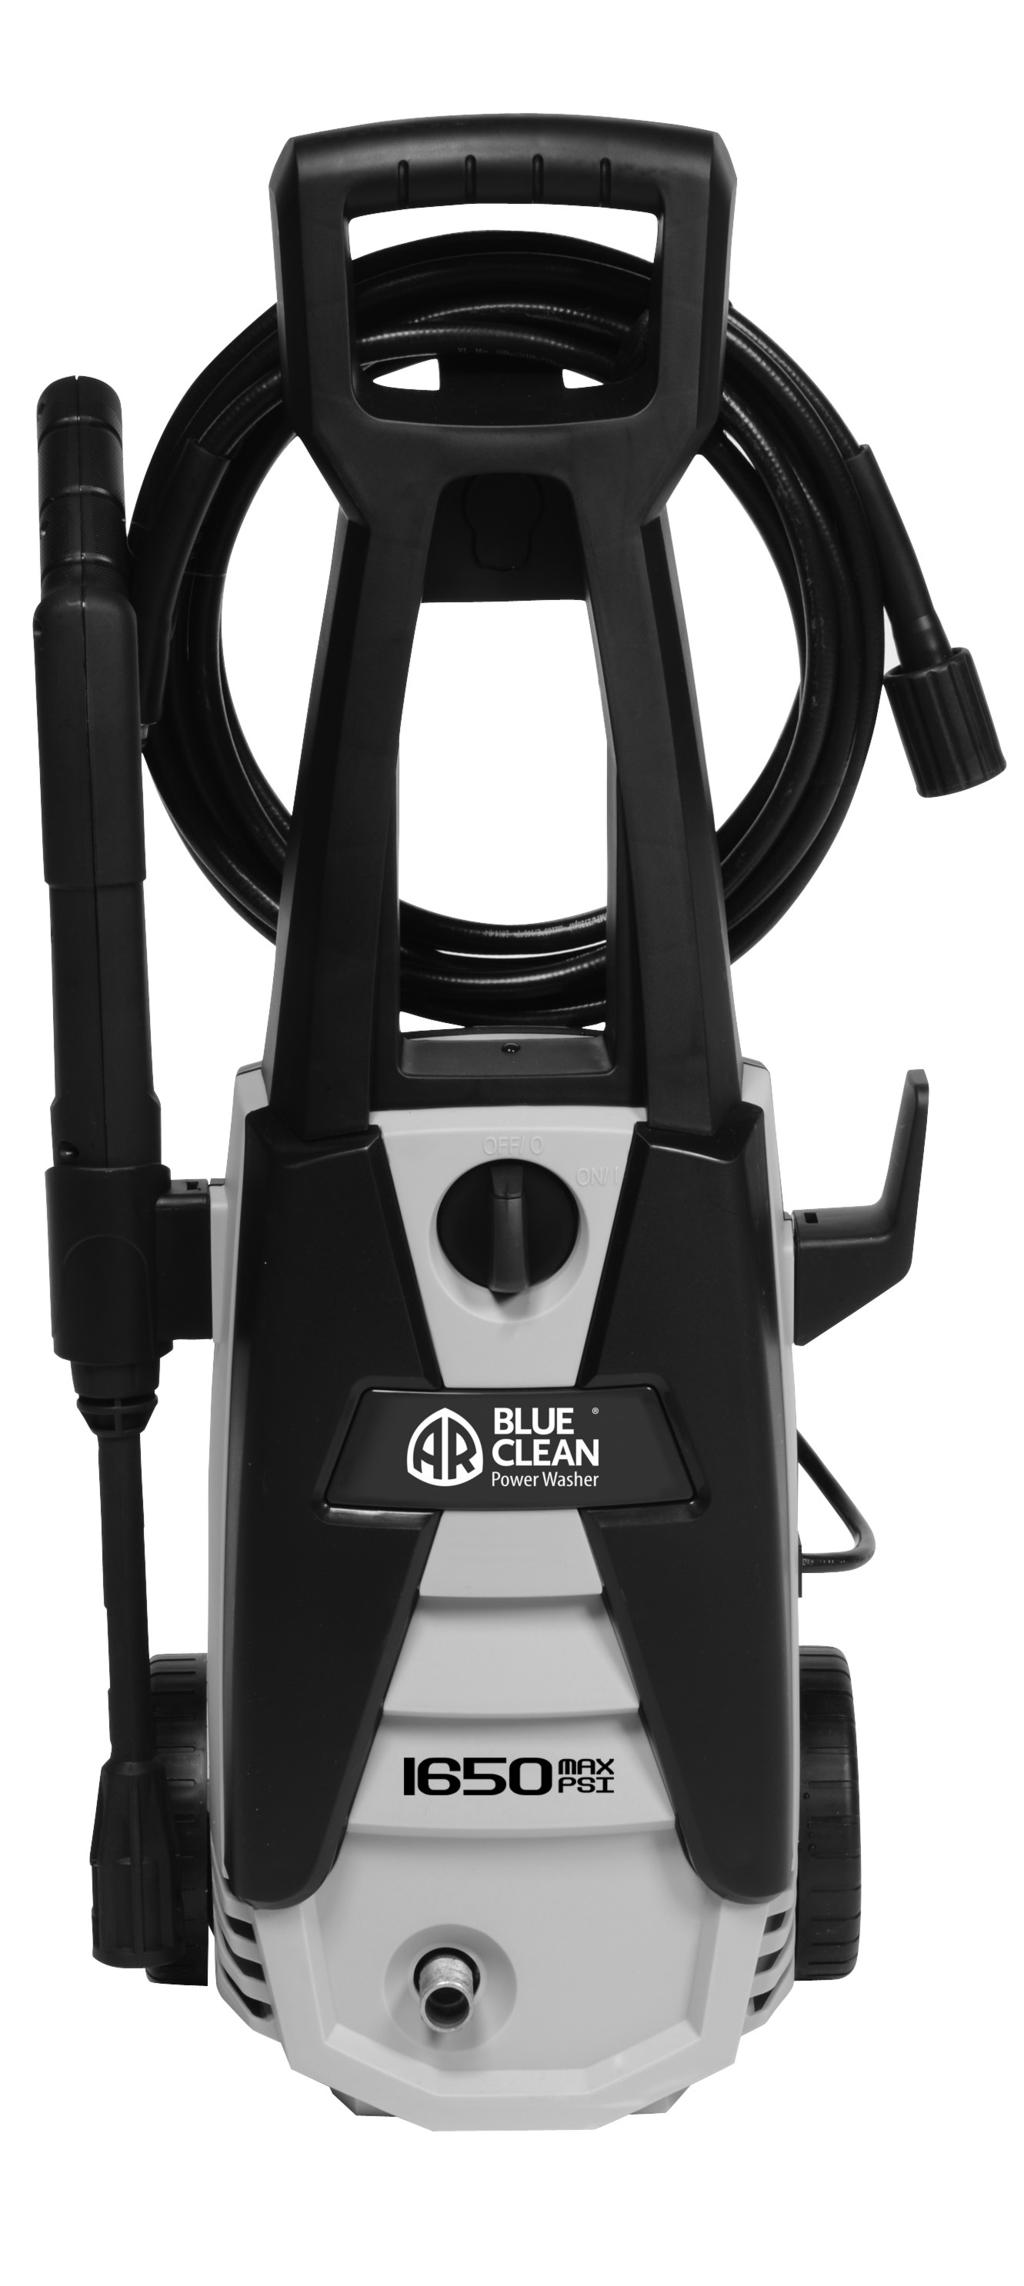 1650 PSI Electric Pressure Washer ASSEMBLY, CARE AND USE INSTRUCTIONS Model AR 144 S READ CAREFULLY IMPORTANT: RETAIN THESE INSTRUCTIONS AND ATTACH RECEIPT TO MANUAL FOR FUTURE REFERENCE